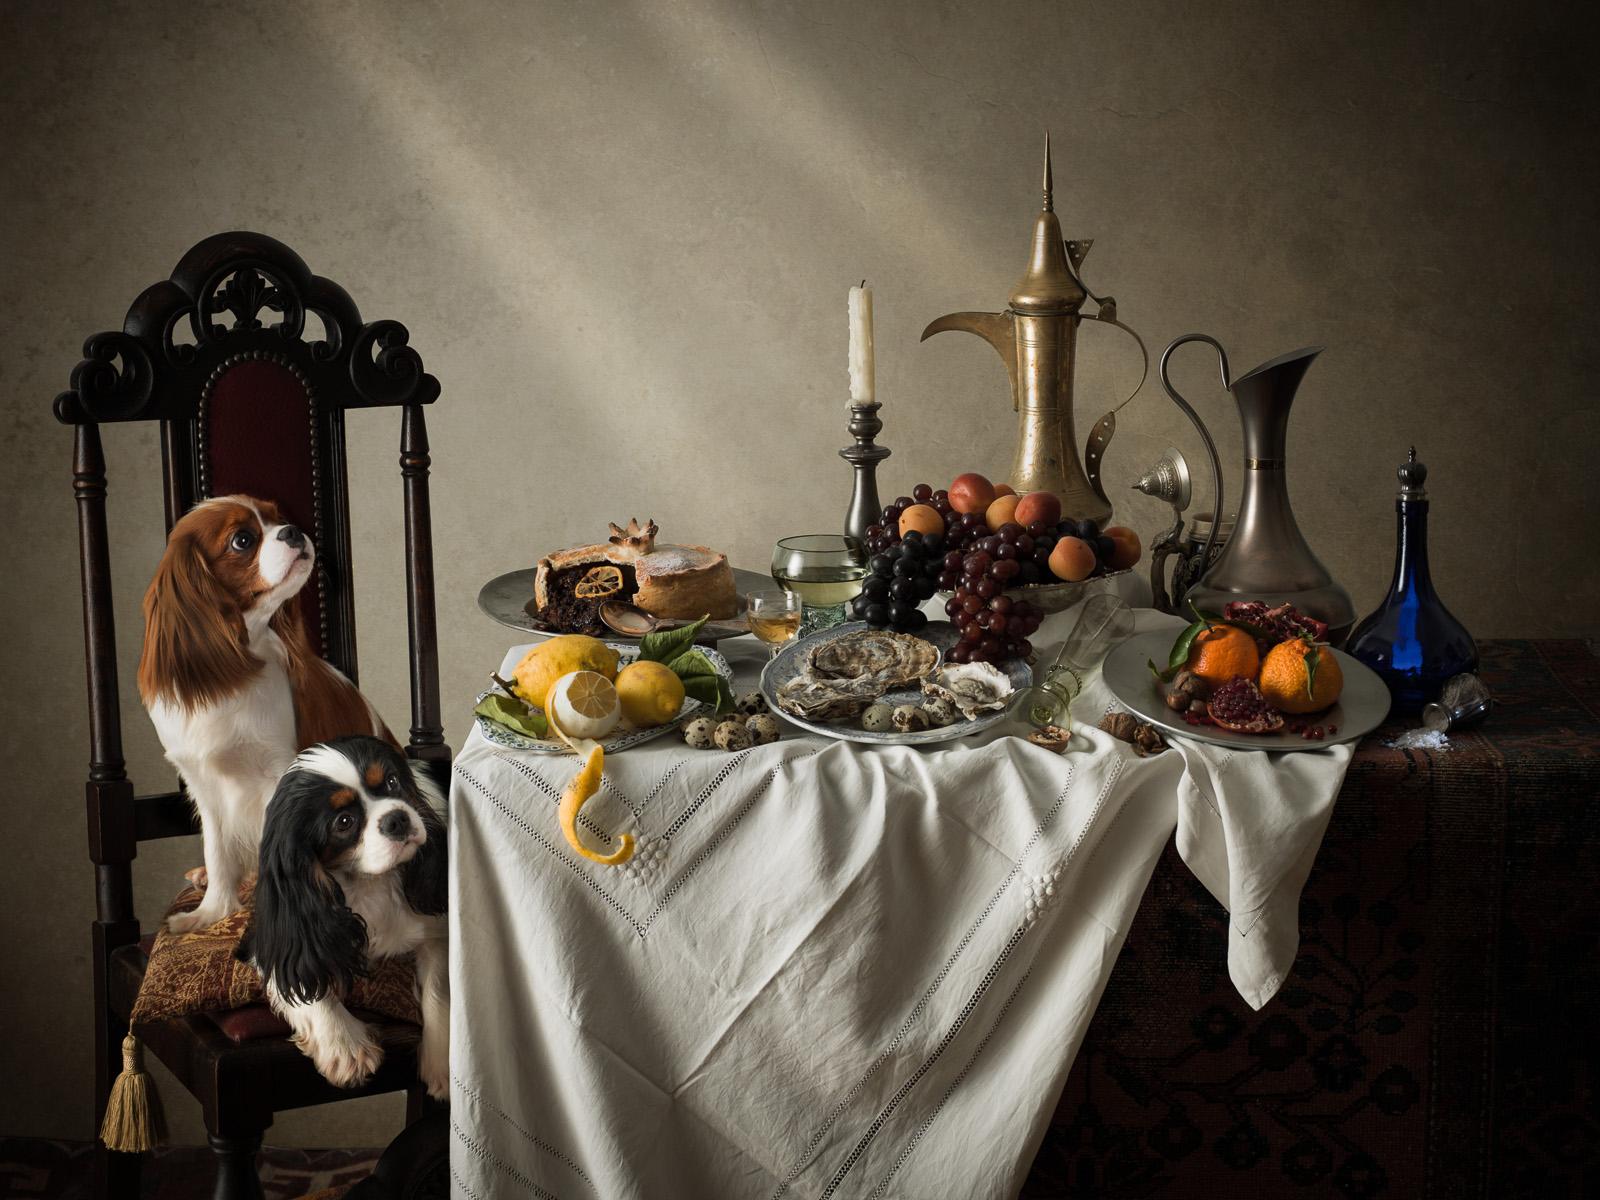 Dutch dog #3 King Charles Spaniels - Animal signed limited edition contemporary - Contemporary Photograph by Tim Platt